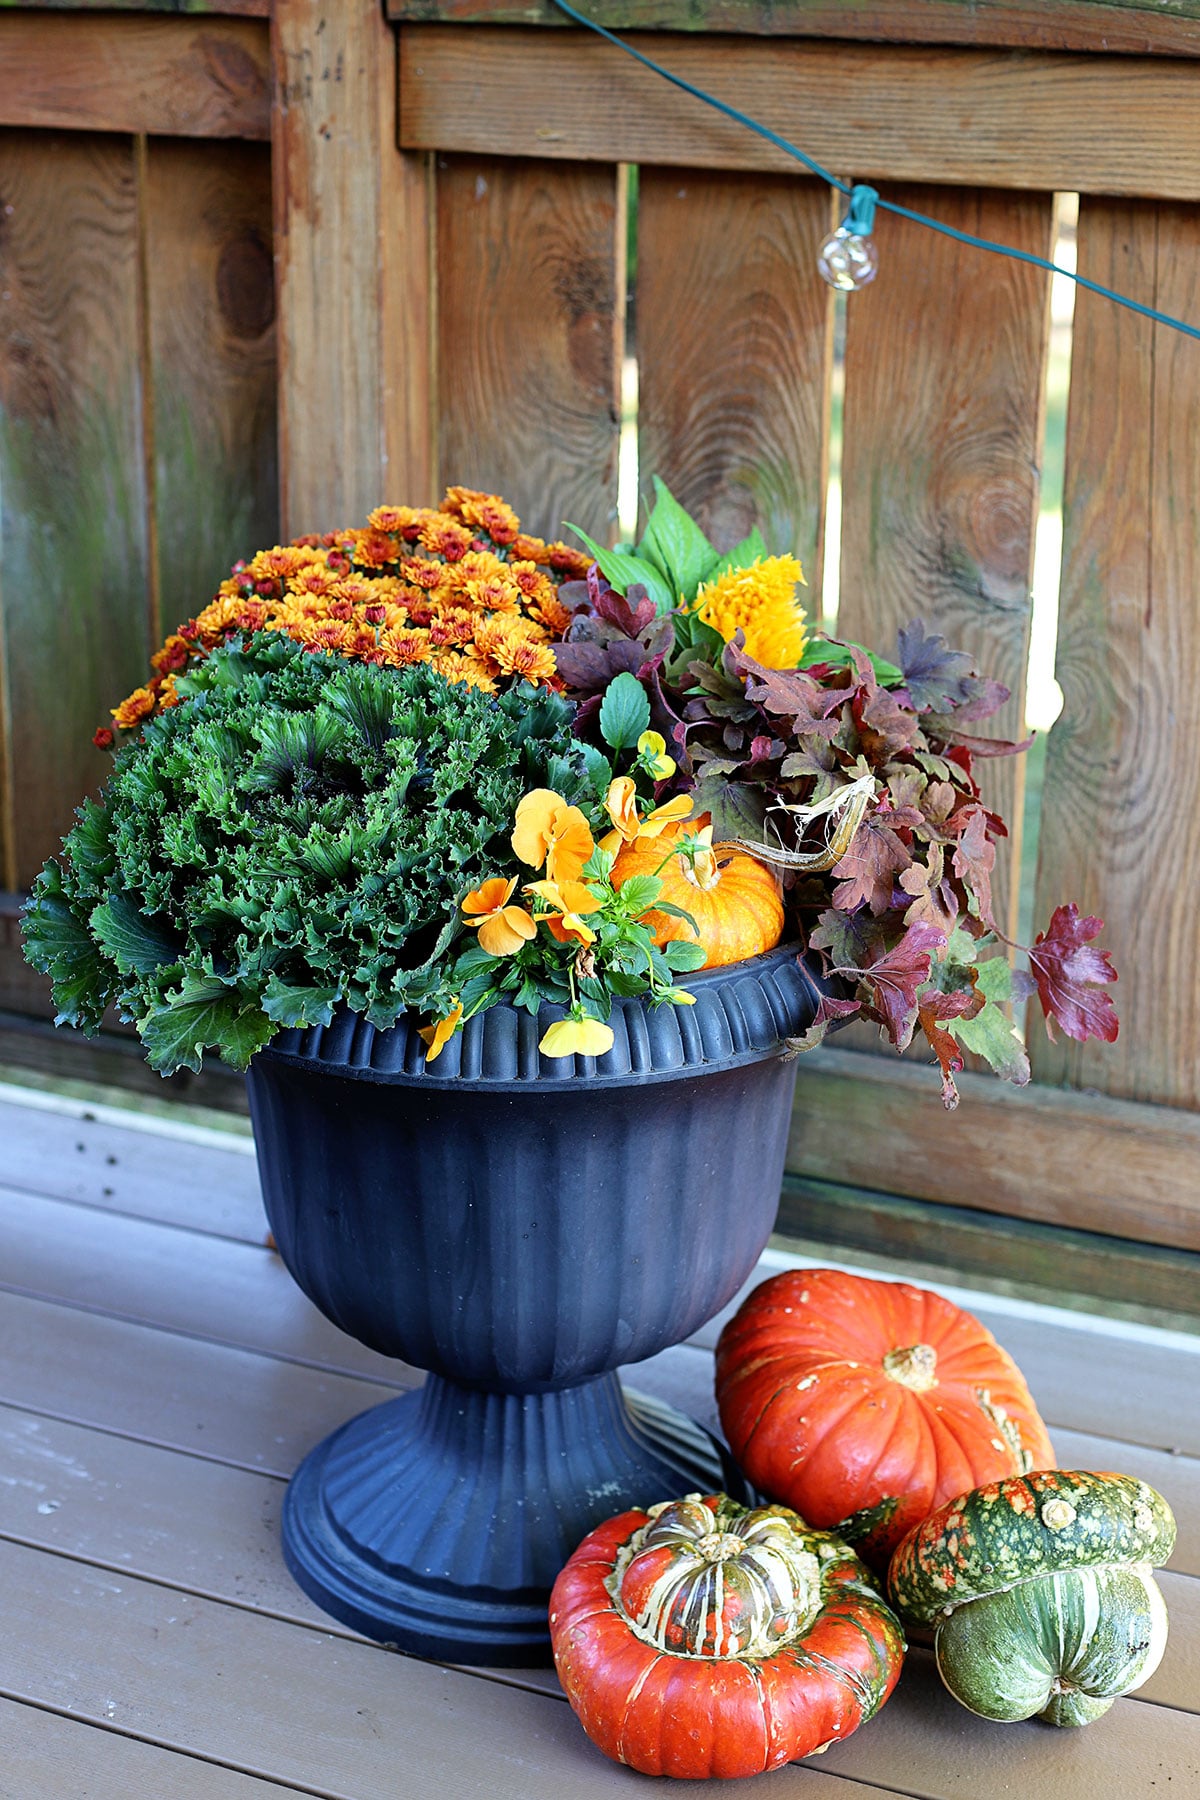 Fall planter using traditional fall plants including mums, ornamental cabbage, pansies and pumpkins.